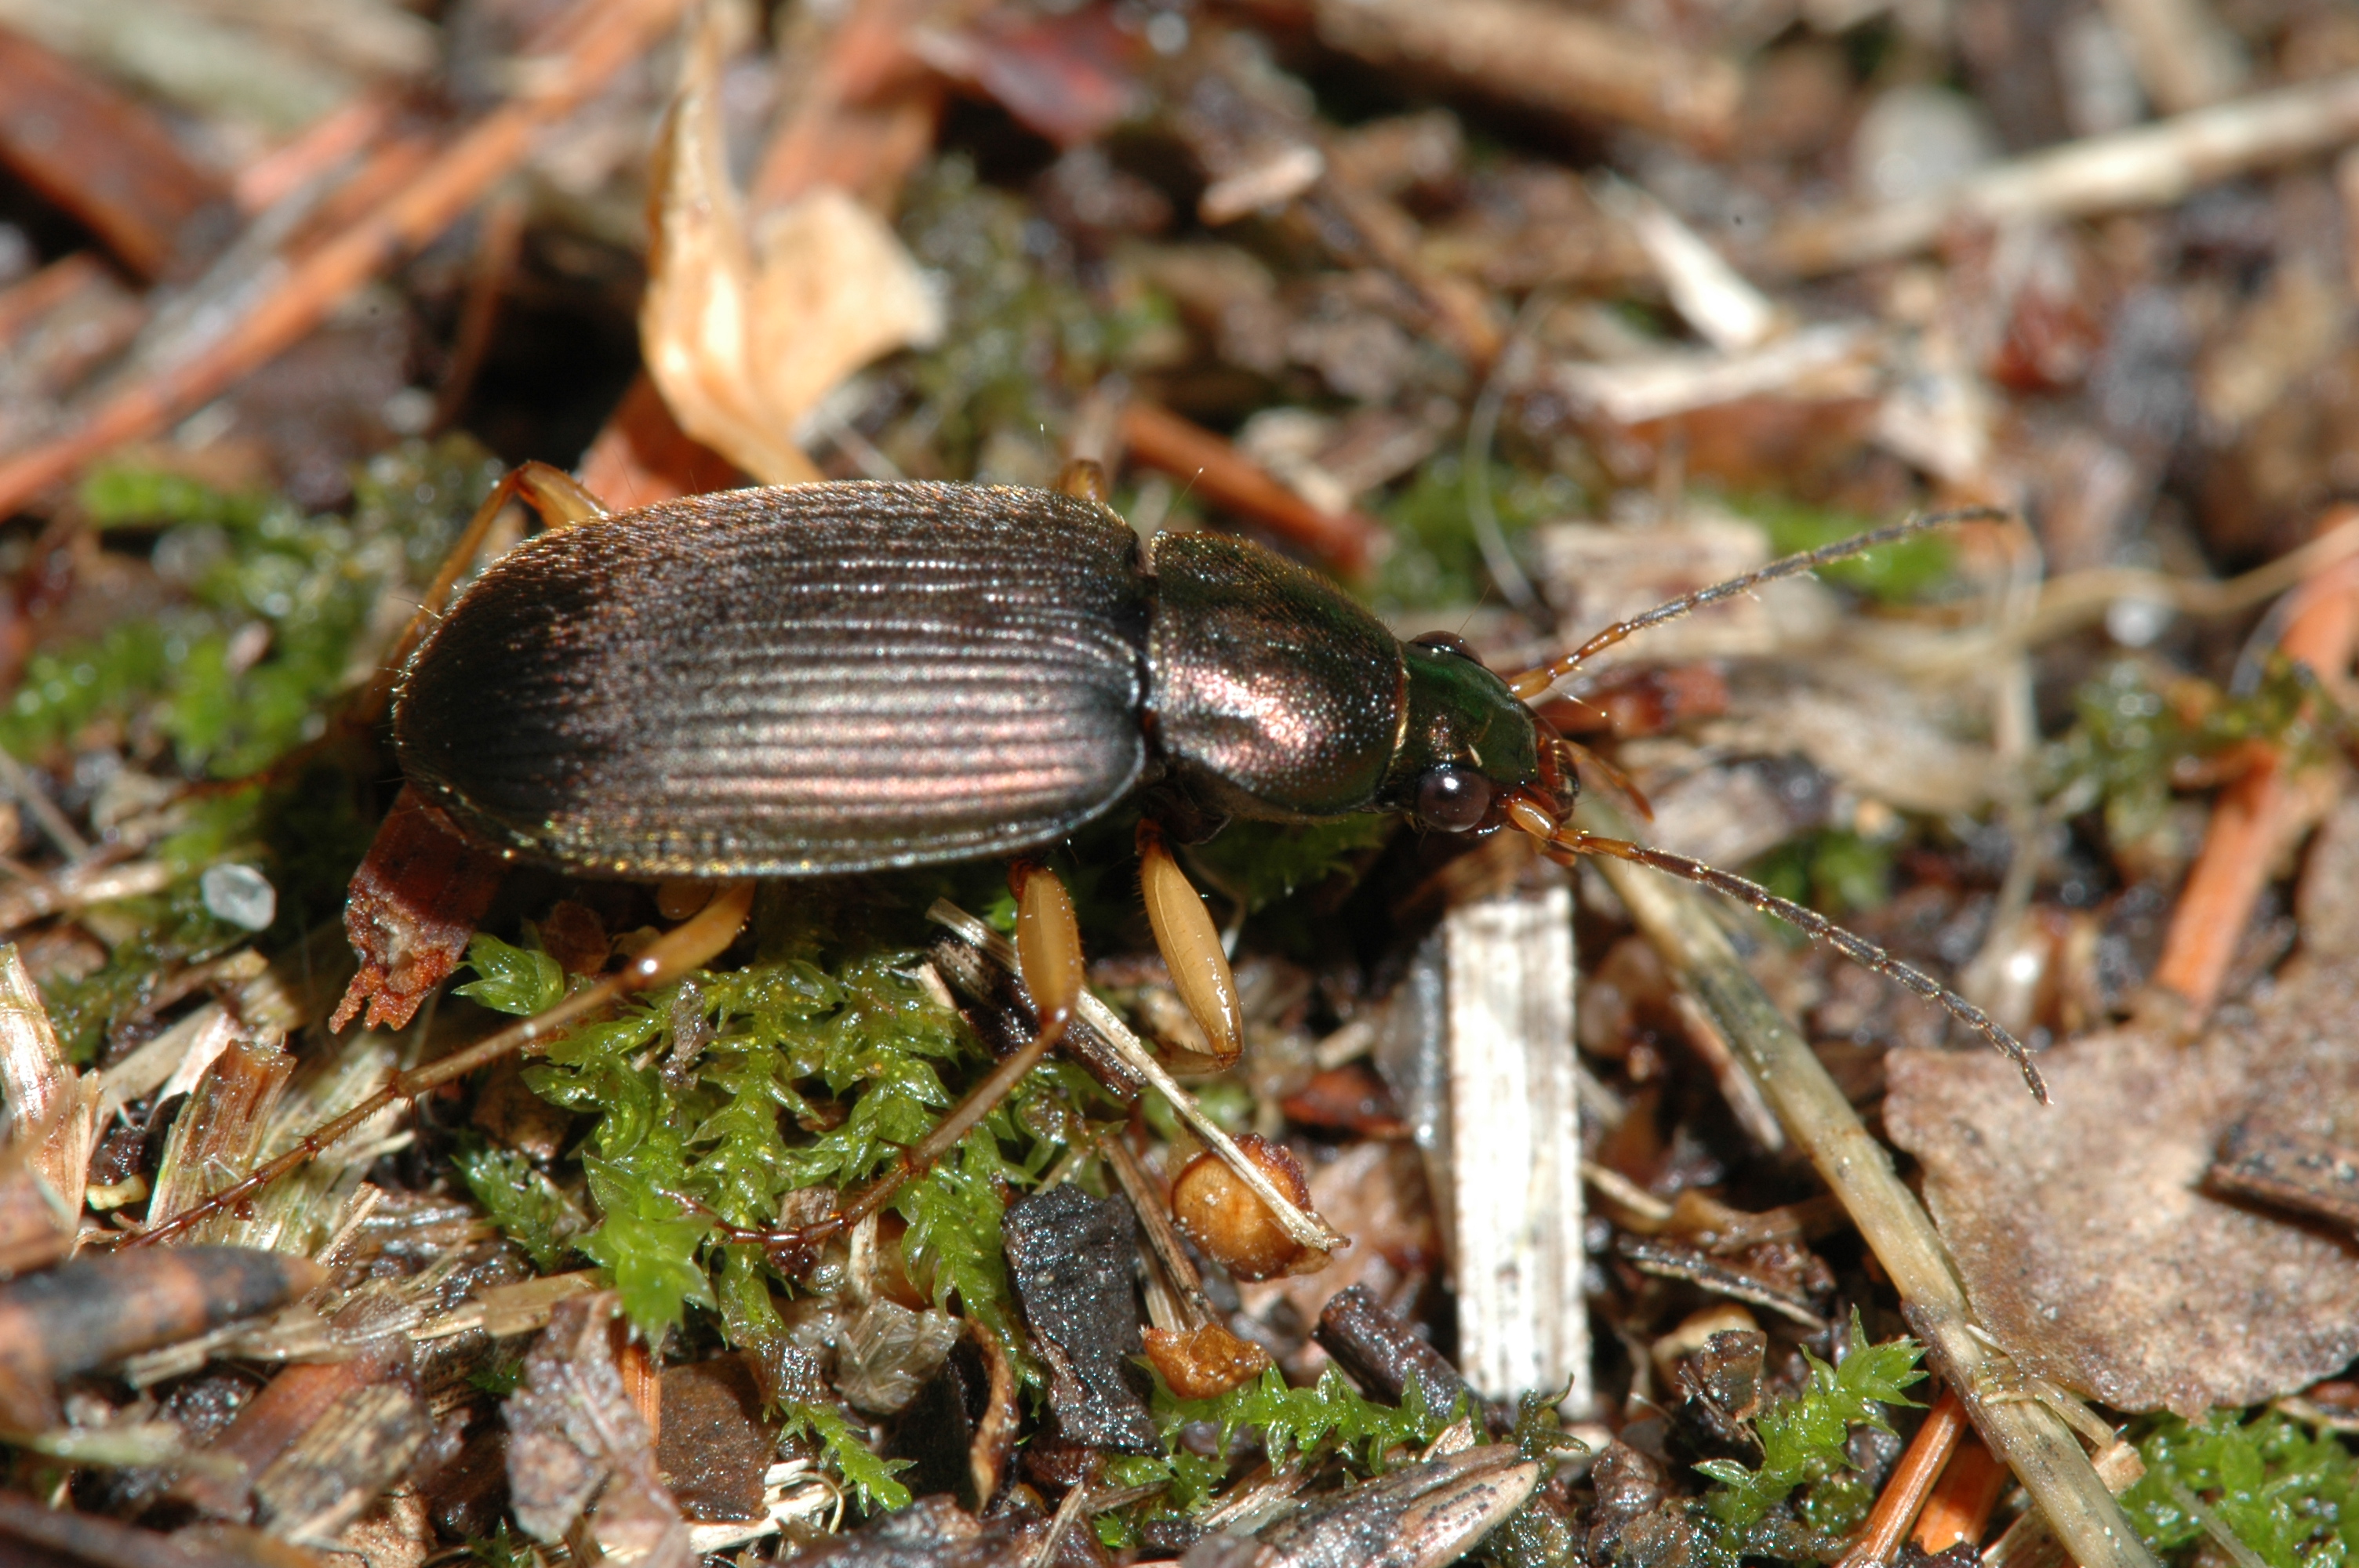 A metallic brown beetle with several lines on its back